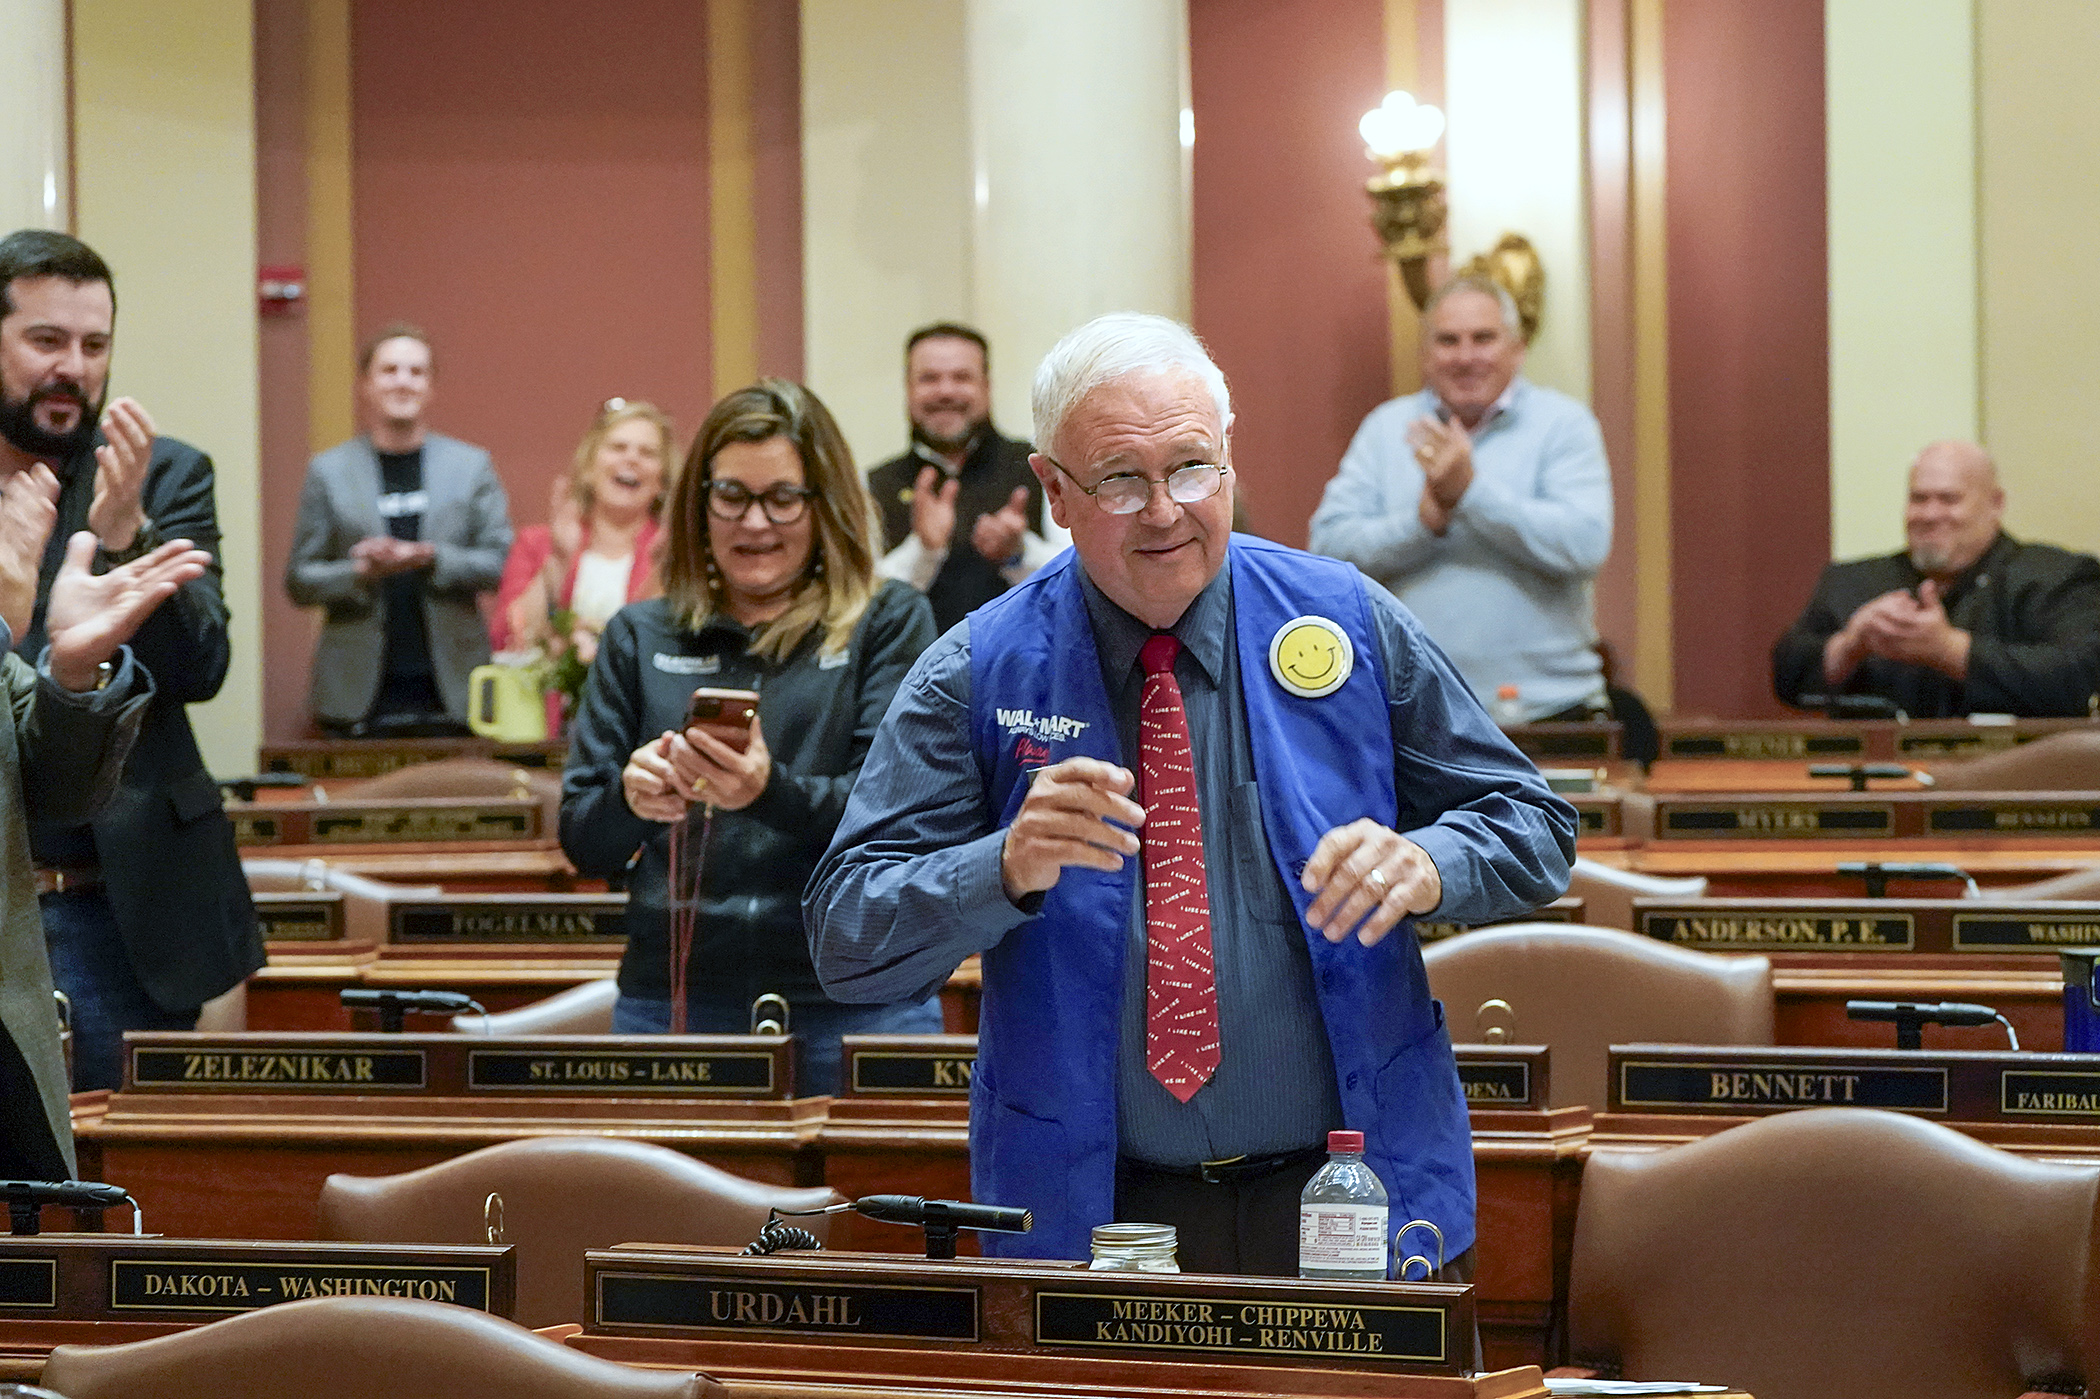 Rep. Dean Urdahl reveals his retirement plans following a speech on the House Floor May 20. The representative from Grove City has served in the House for 22 years. (Photo by Michele Jokinen)